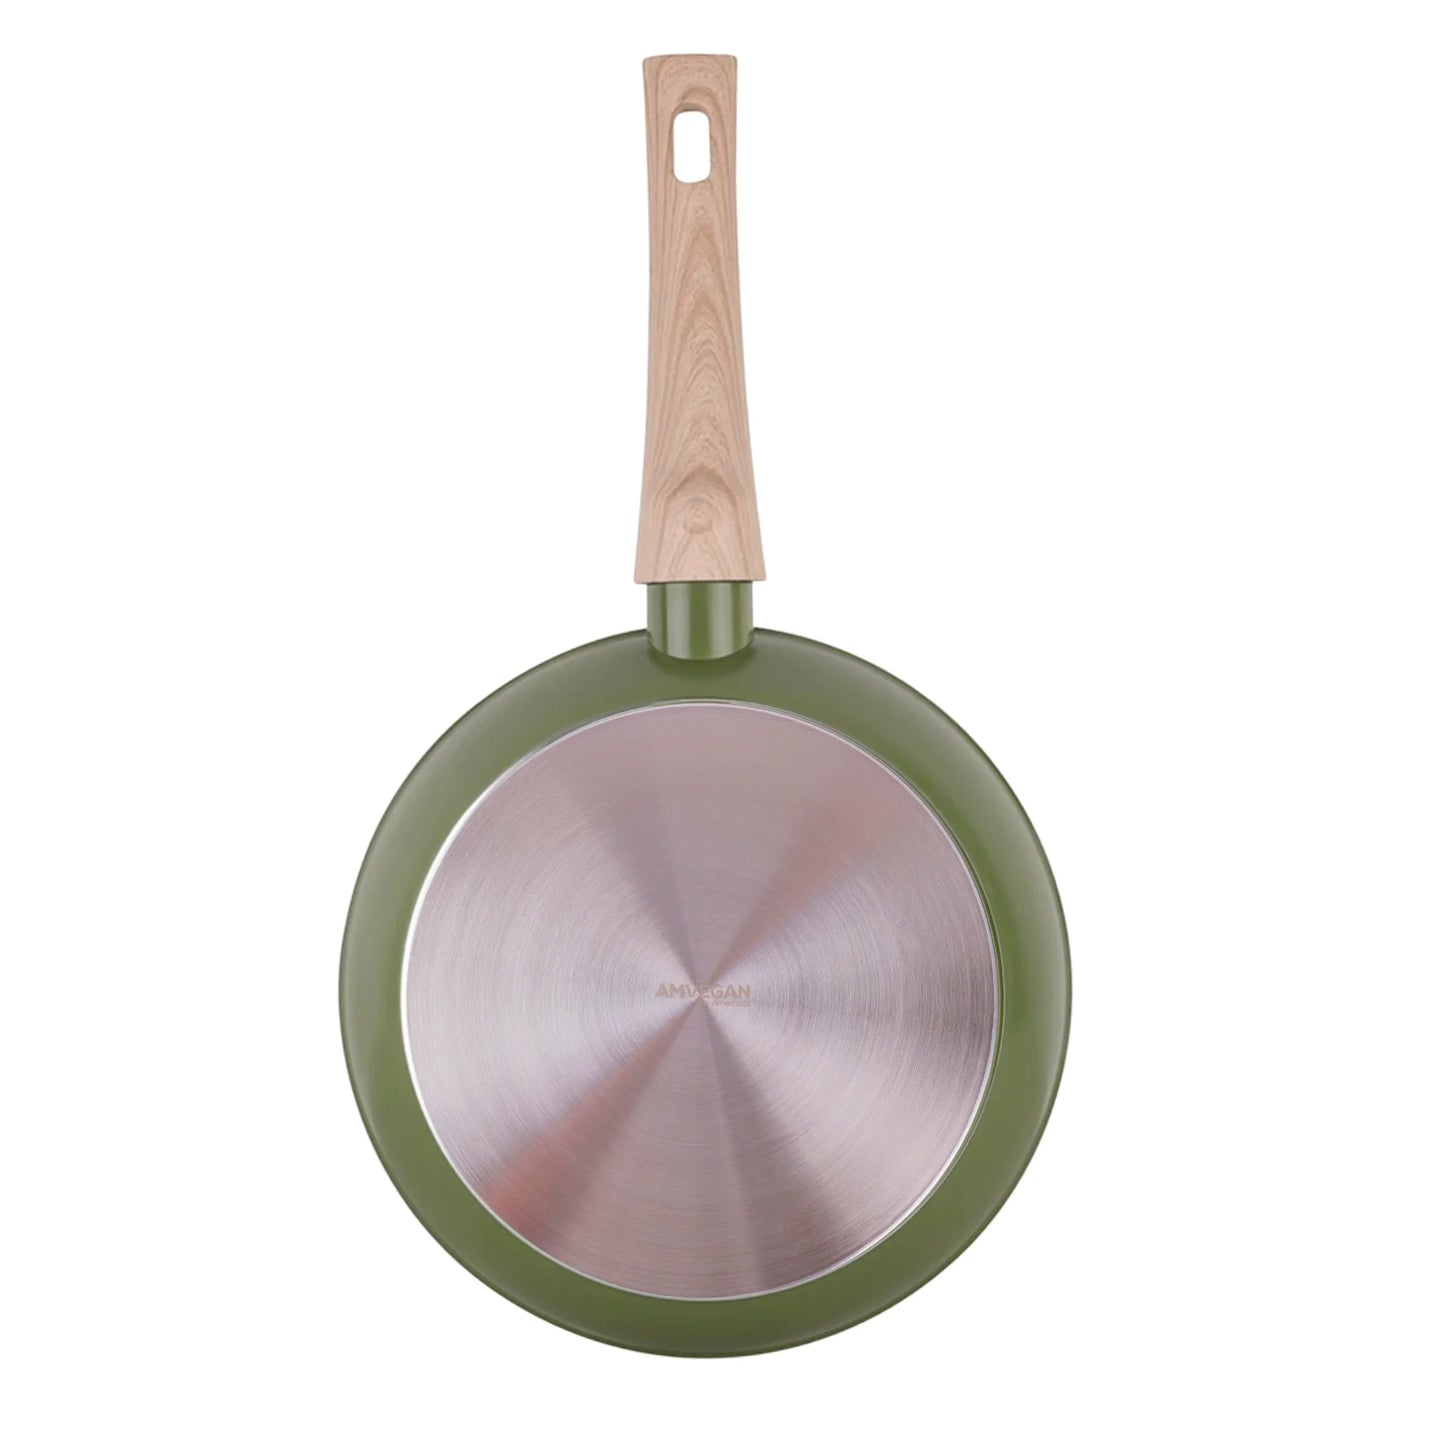 AmVegan frying pan with removable handle, suitable for oven and all types of cookers, including induction 